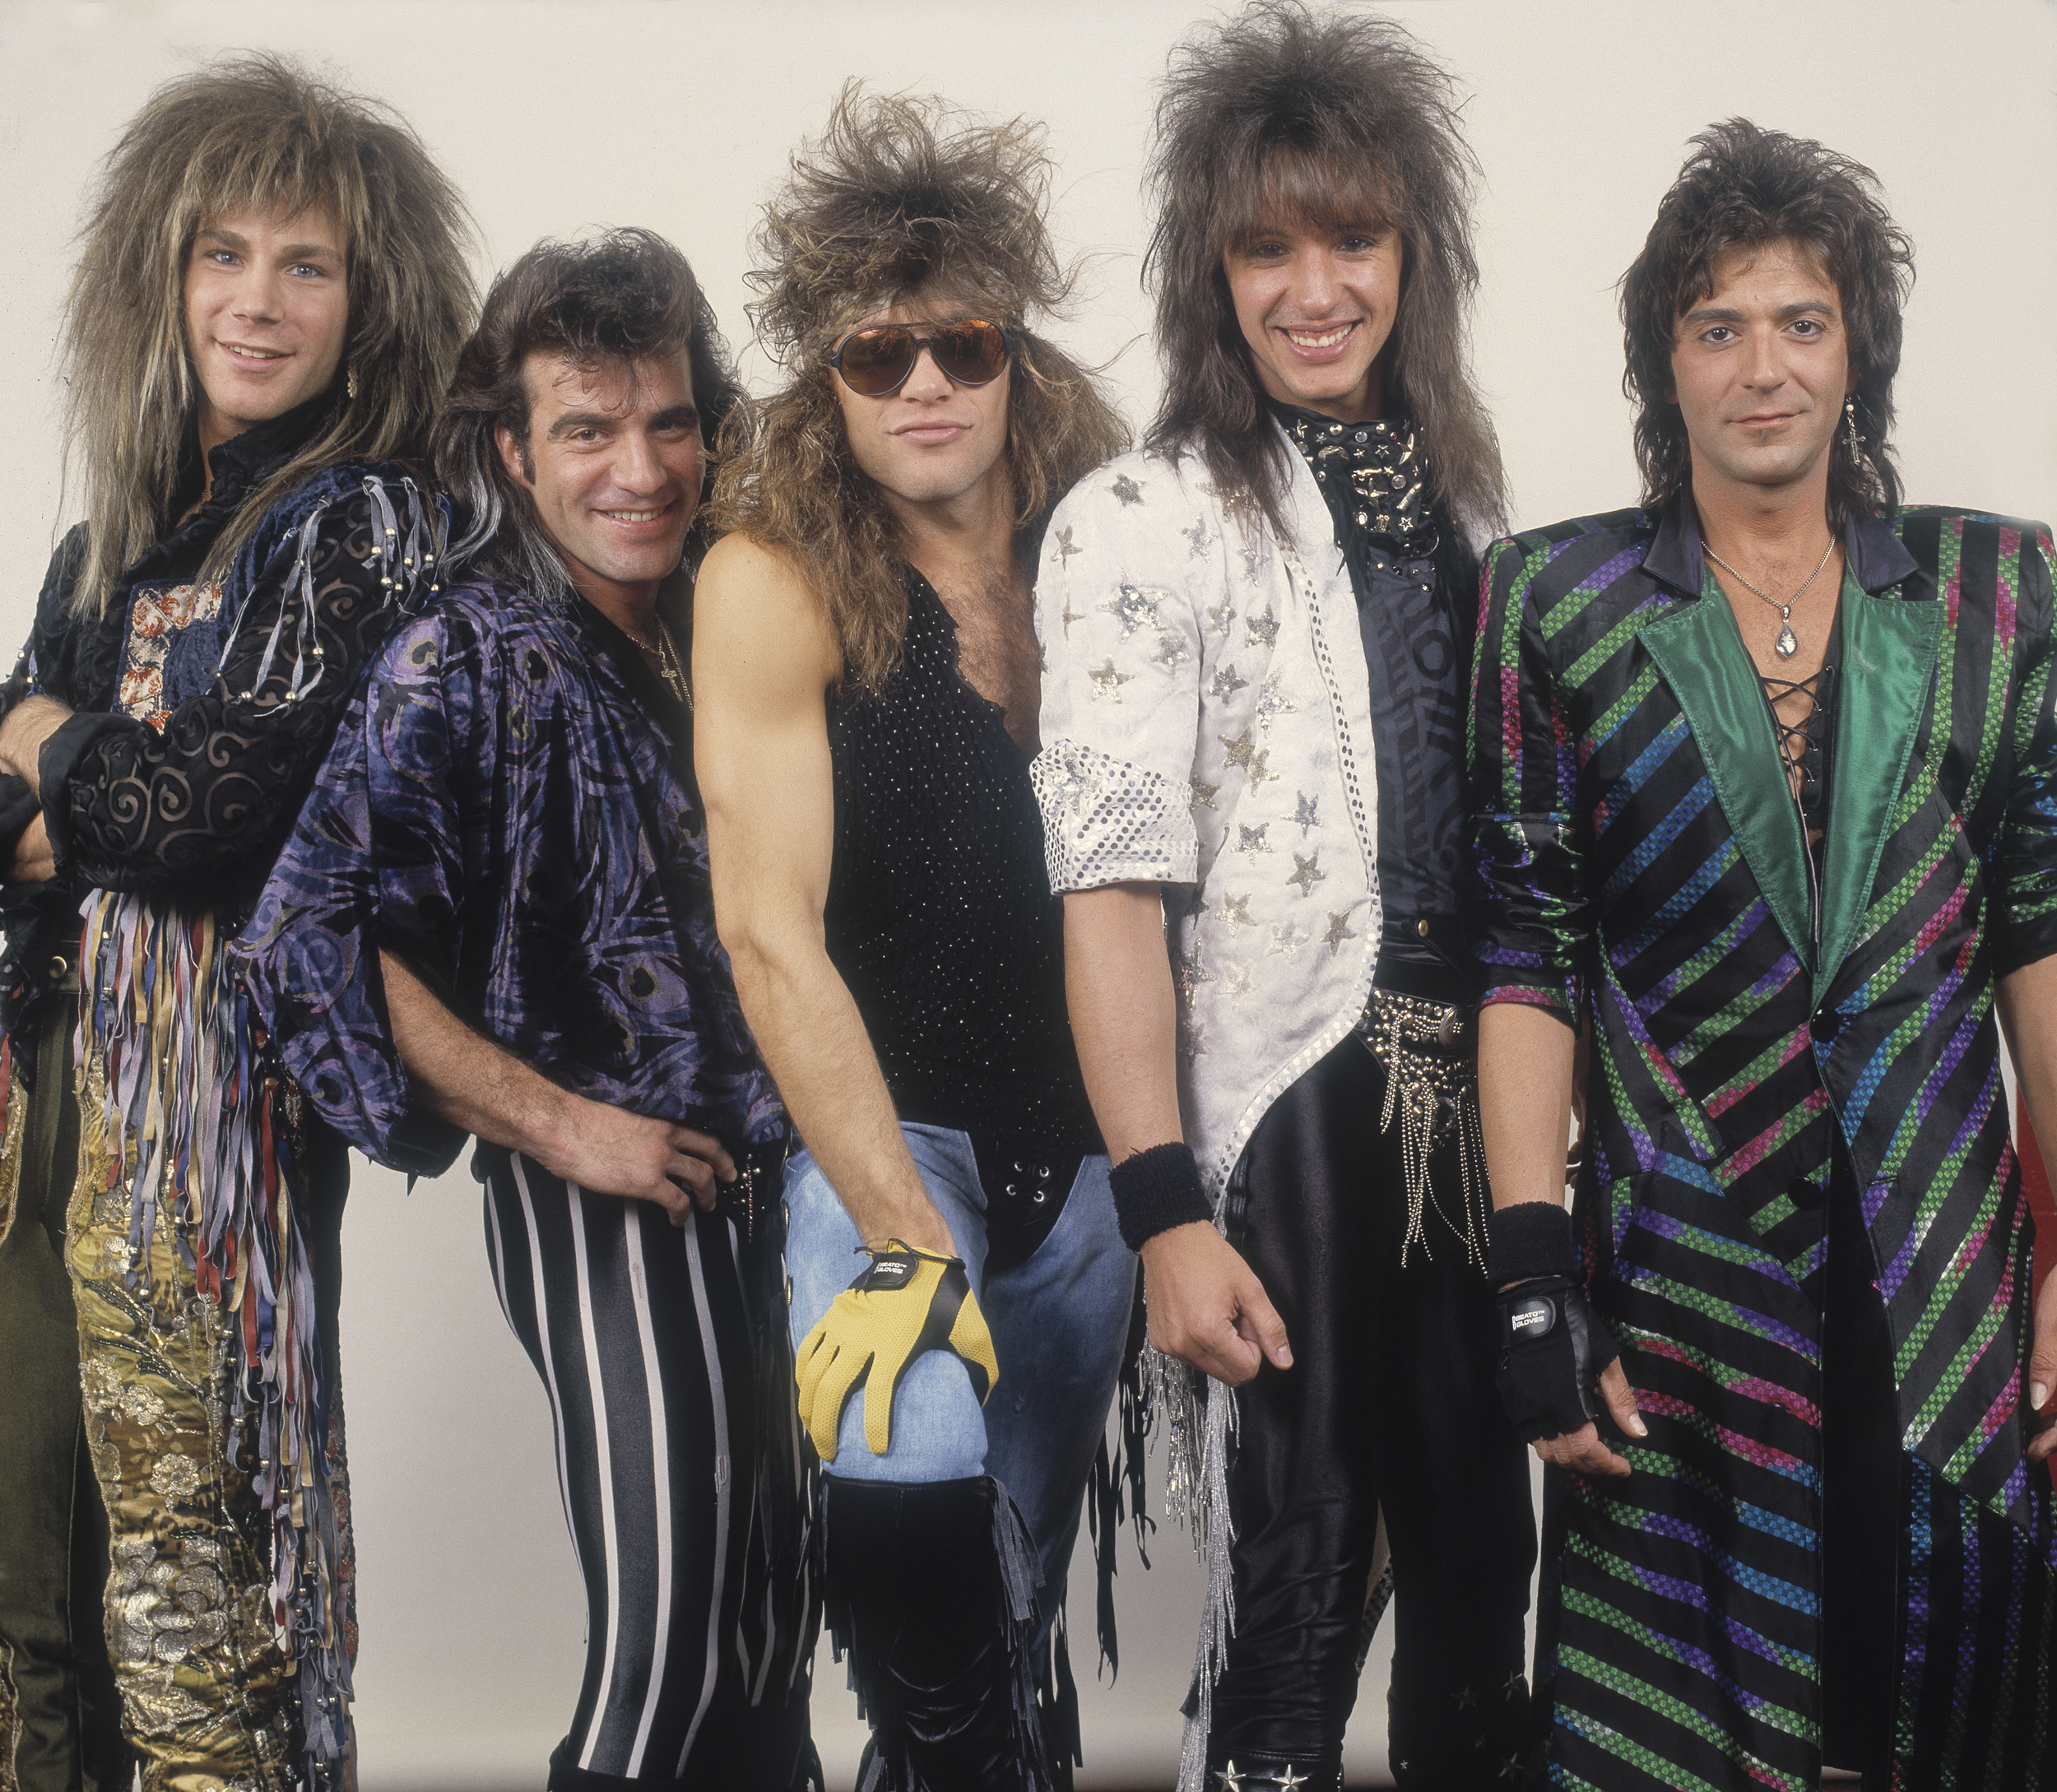 <p>Bon Jovi is another band that might be on the line when talking about whether it belongs in the hair metal category. We think it does, and if that's the case, it needs to be near the top of the list. Even in the <a href="https://www.youtube.com/watch?v=s86K-p089R8" rel="noopener noreferrer">"Runaway" </a>days of 1984, the hair was teased, and the stage coats were long. Of course, Bon Jovi was also a group made for MTV. Its songs perfectly combine arena rock and pop-metal, capturing a mainstream audience. The success of 1986's <em>Slippery When Wet</em>, featuring the <a href="https://www.youtube.com/watch?v=lDK9QqIzhwk" rel="noopener noreferrer">anthemic "Livin' on a Prayer,<span>"</span></a><span> made Bon Jovi one of the biggest acts in the world. More than anybody else on this list, it's been able to remain relevant and even earn induction into the Rock & Roll Hall of Fame.</span></p><p>You may also like: <a href='https://www.yardbarker.com/entertainment/articles/23_movies_that_highlight_why_1999_was_peak_cinema_122723/s1__39607288'>23 movies that highlight why 1999 was peak cinema</a></p>